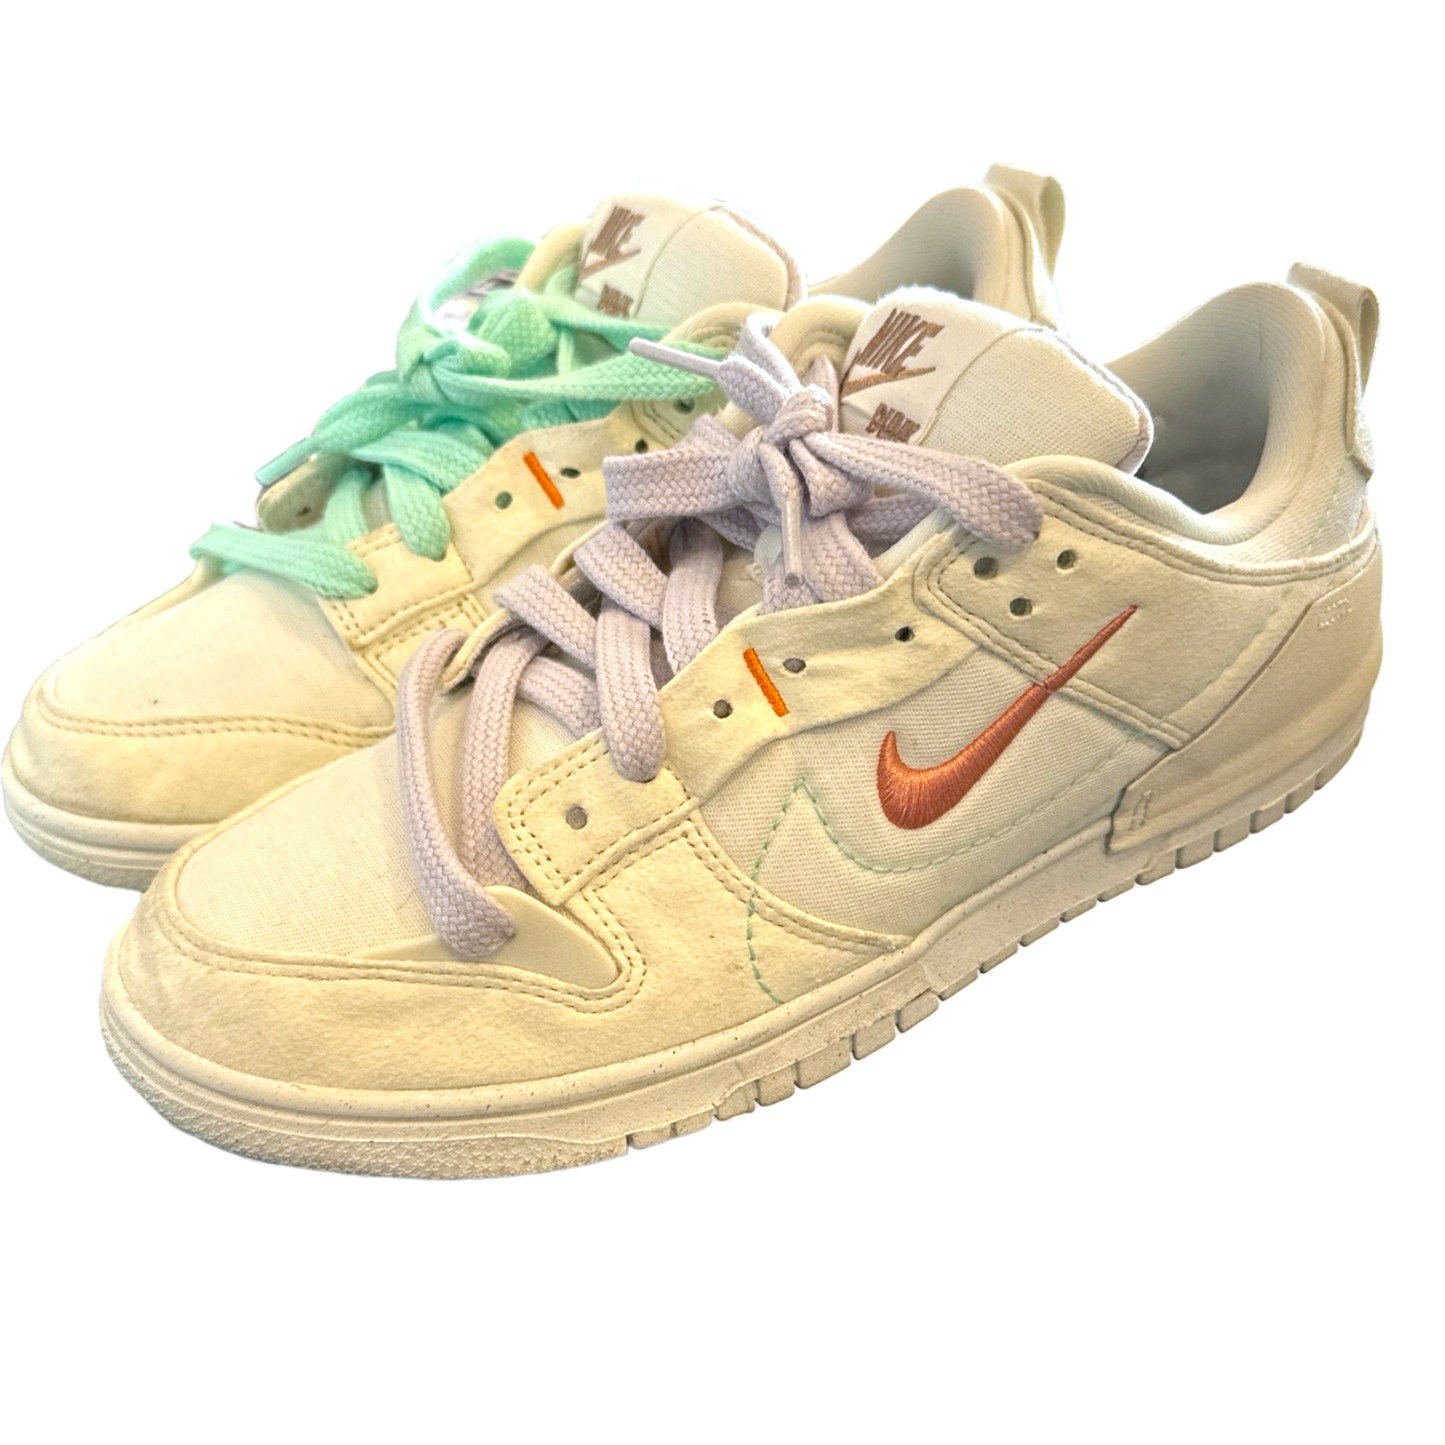 Nike - Dunk Low Disrupt 2 Pale Ivory Womens 8.5 Sneakers